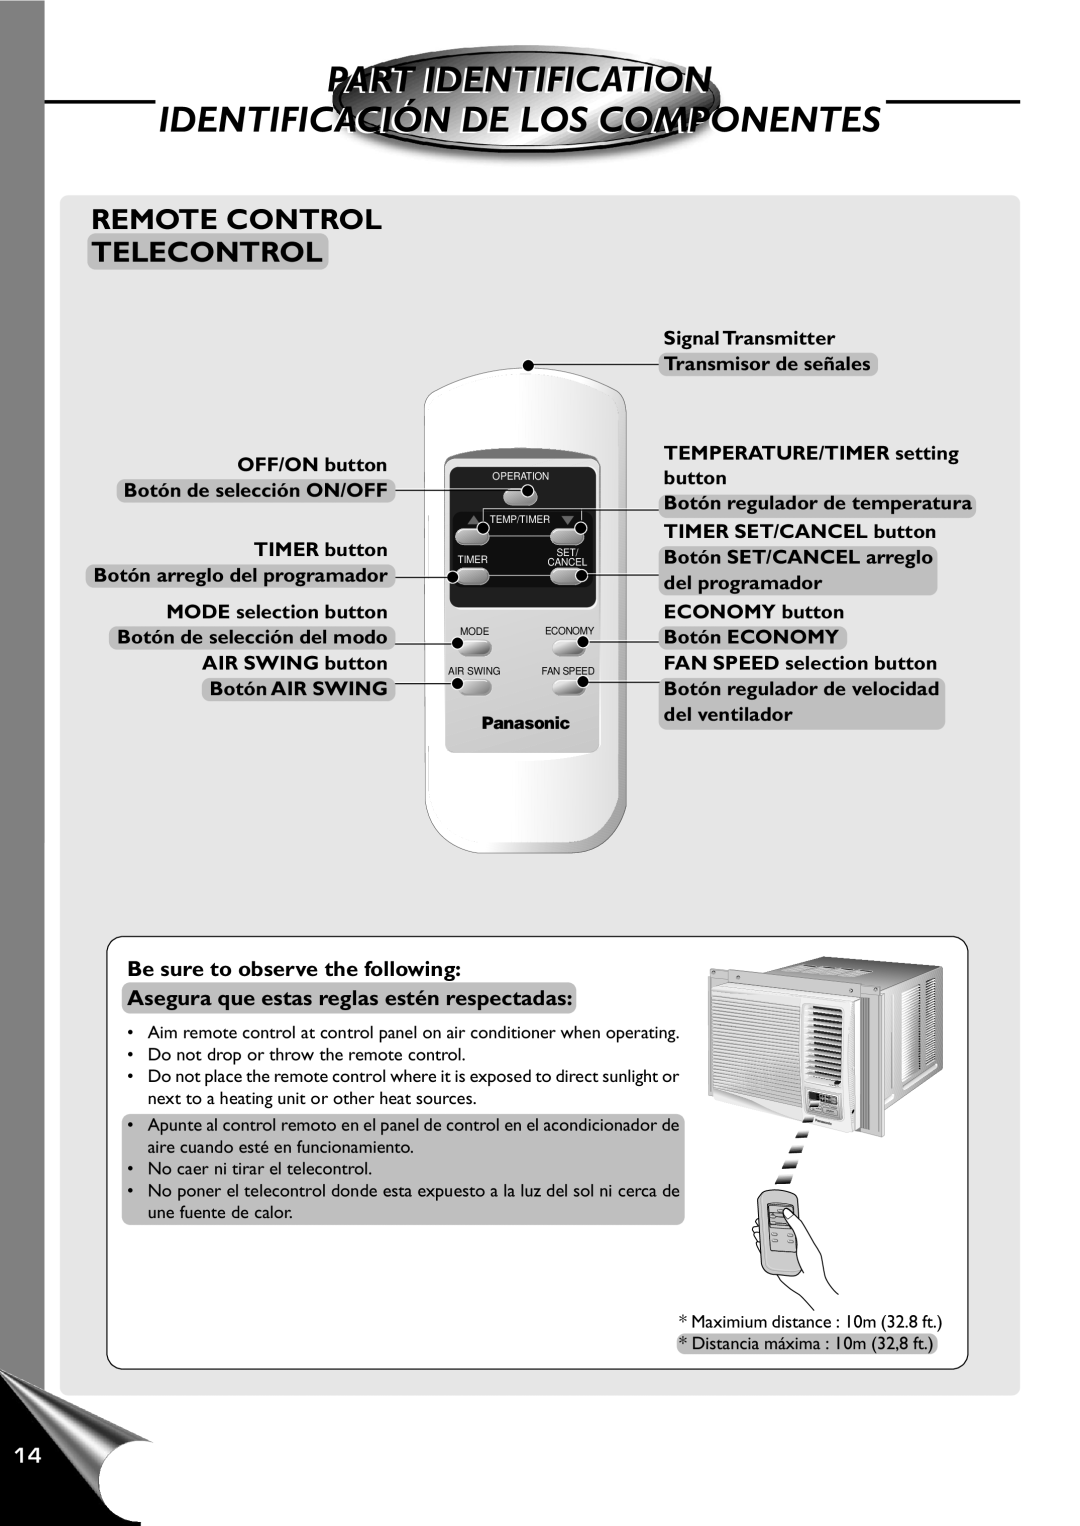 Panasonic CW-XC120AU Remote Control Telecontrol, Be sure to observe the following, Part Identification, Signal Transmitter 